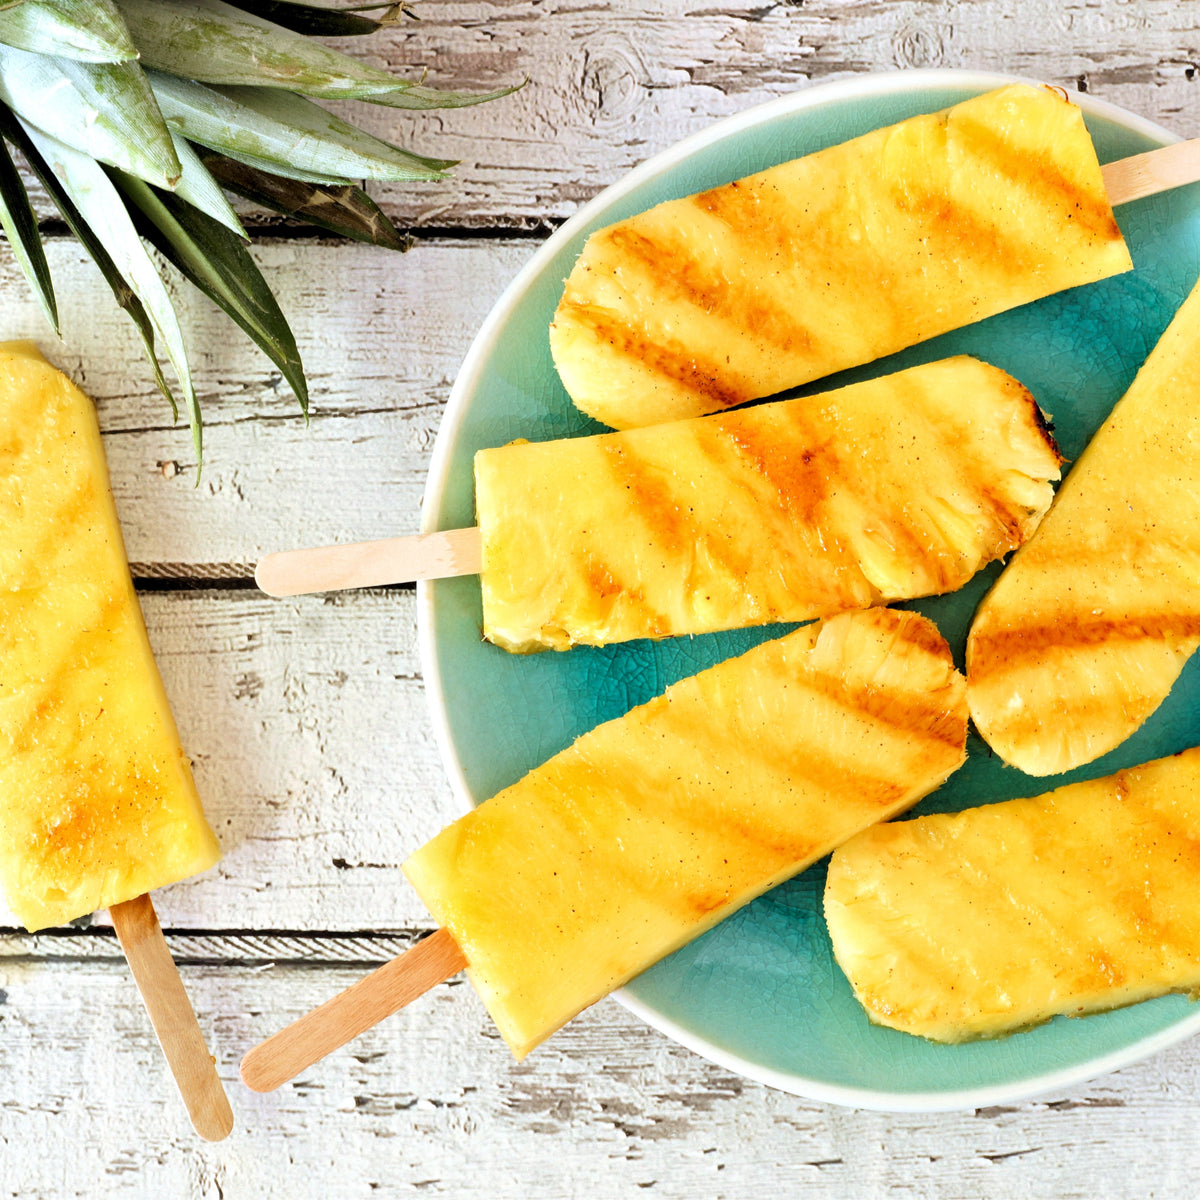 Chargrilled pineapple chunks on ice lolly sticks